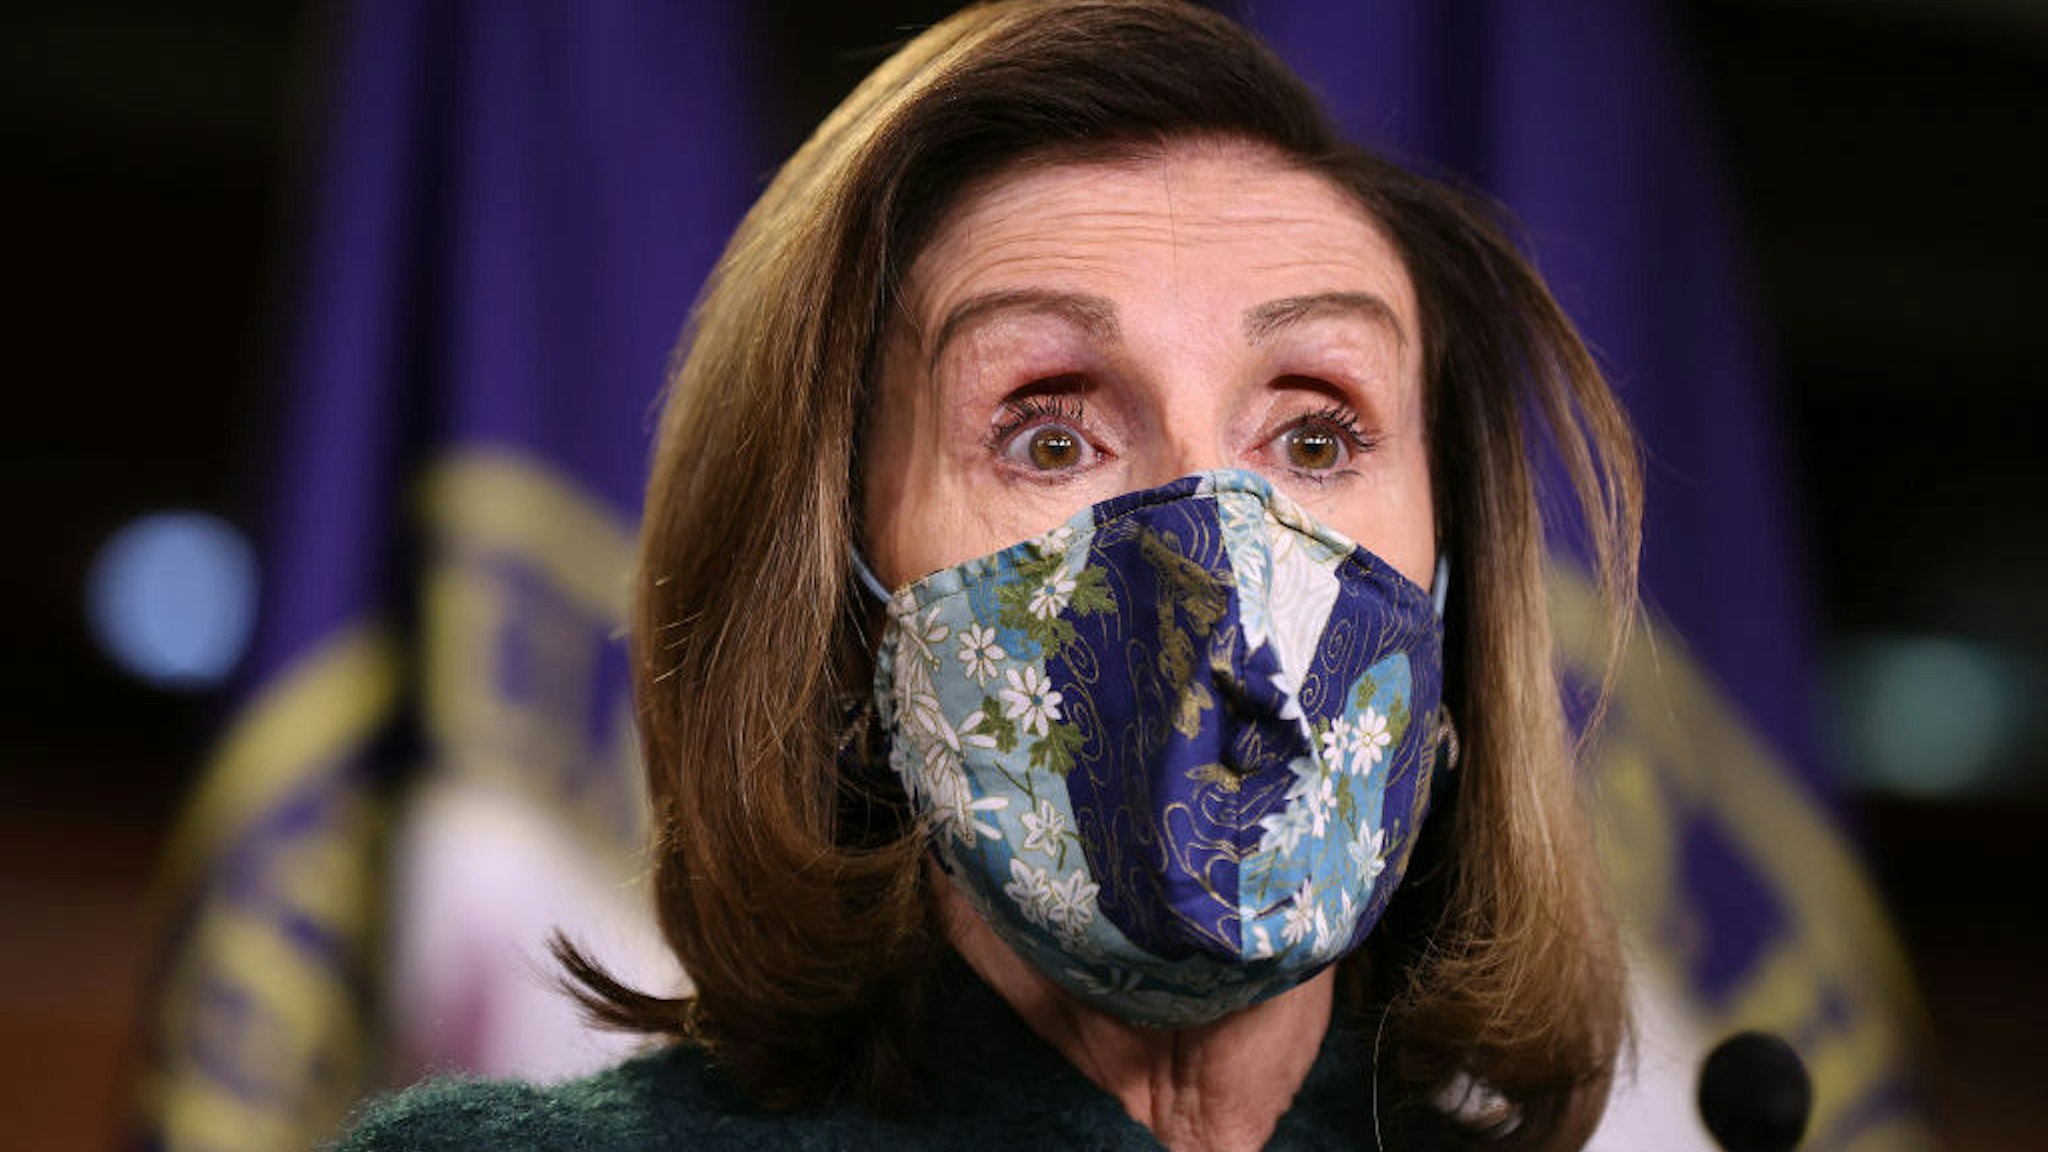 WASHINGTON, DC - JANUARY 28: Wearing a face mask to reduce the risk posed by the novel coronavirus pandemic, Speaker of the House Nancy Pelosi (D-CA) holds her weekly news conference in the U.S. Capitol Visitors Center January 28, 2021 in Washington, DC. When asked about what she means when she said Congress has an 'enemy within,' Pelosi said, 'It means that we have members of Congress who want to bring guns on the floor and have threatened violence on other members of Congress.' (Photo by Chip Somodevilla/Getty Images)